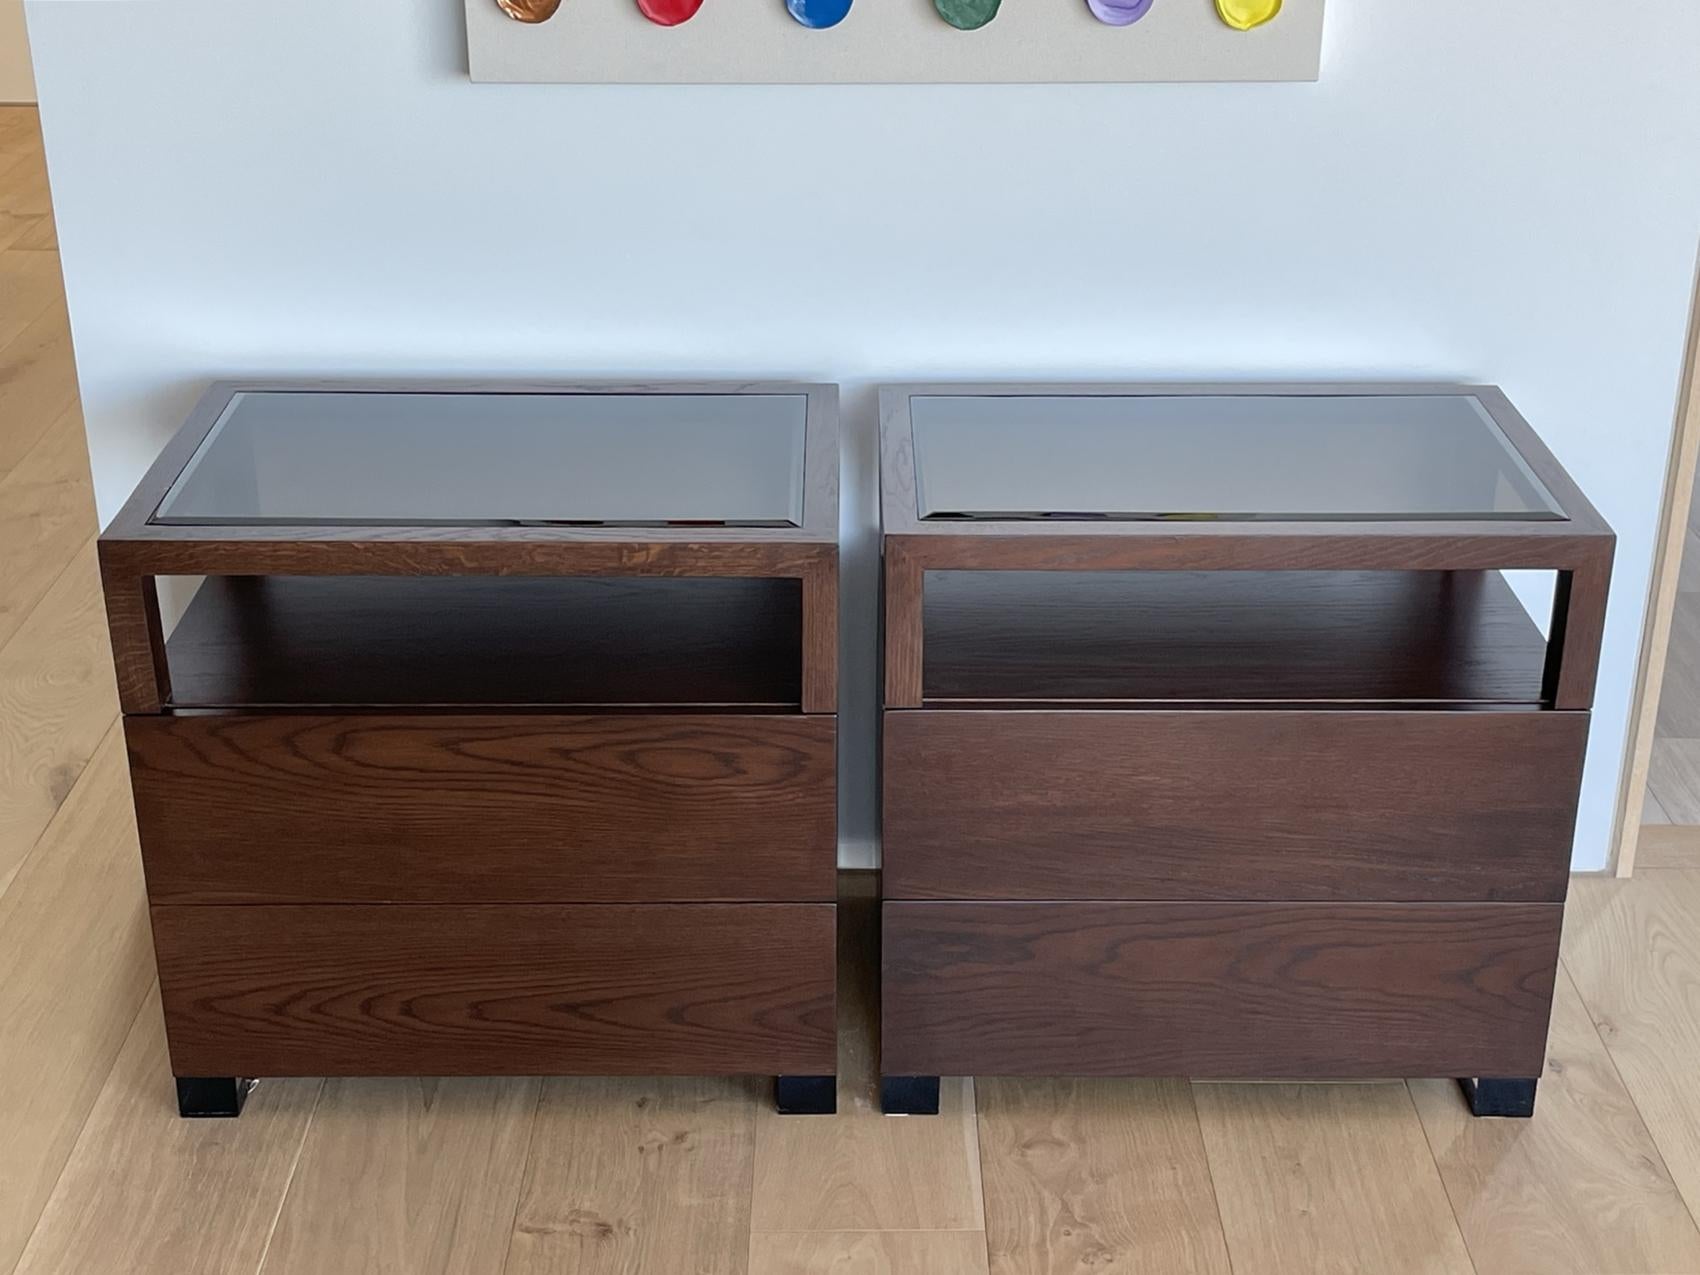 Beautiful pair of nightstands made of solid white oak with bronzed lucite legs and tops.

The pieces have beautiful lines and great presence, they are solidly built and crafted locally.

The nightstands come with two drawers for storage and it also